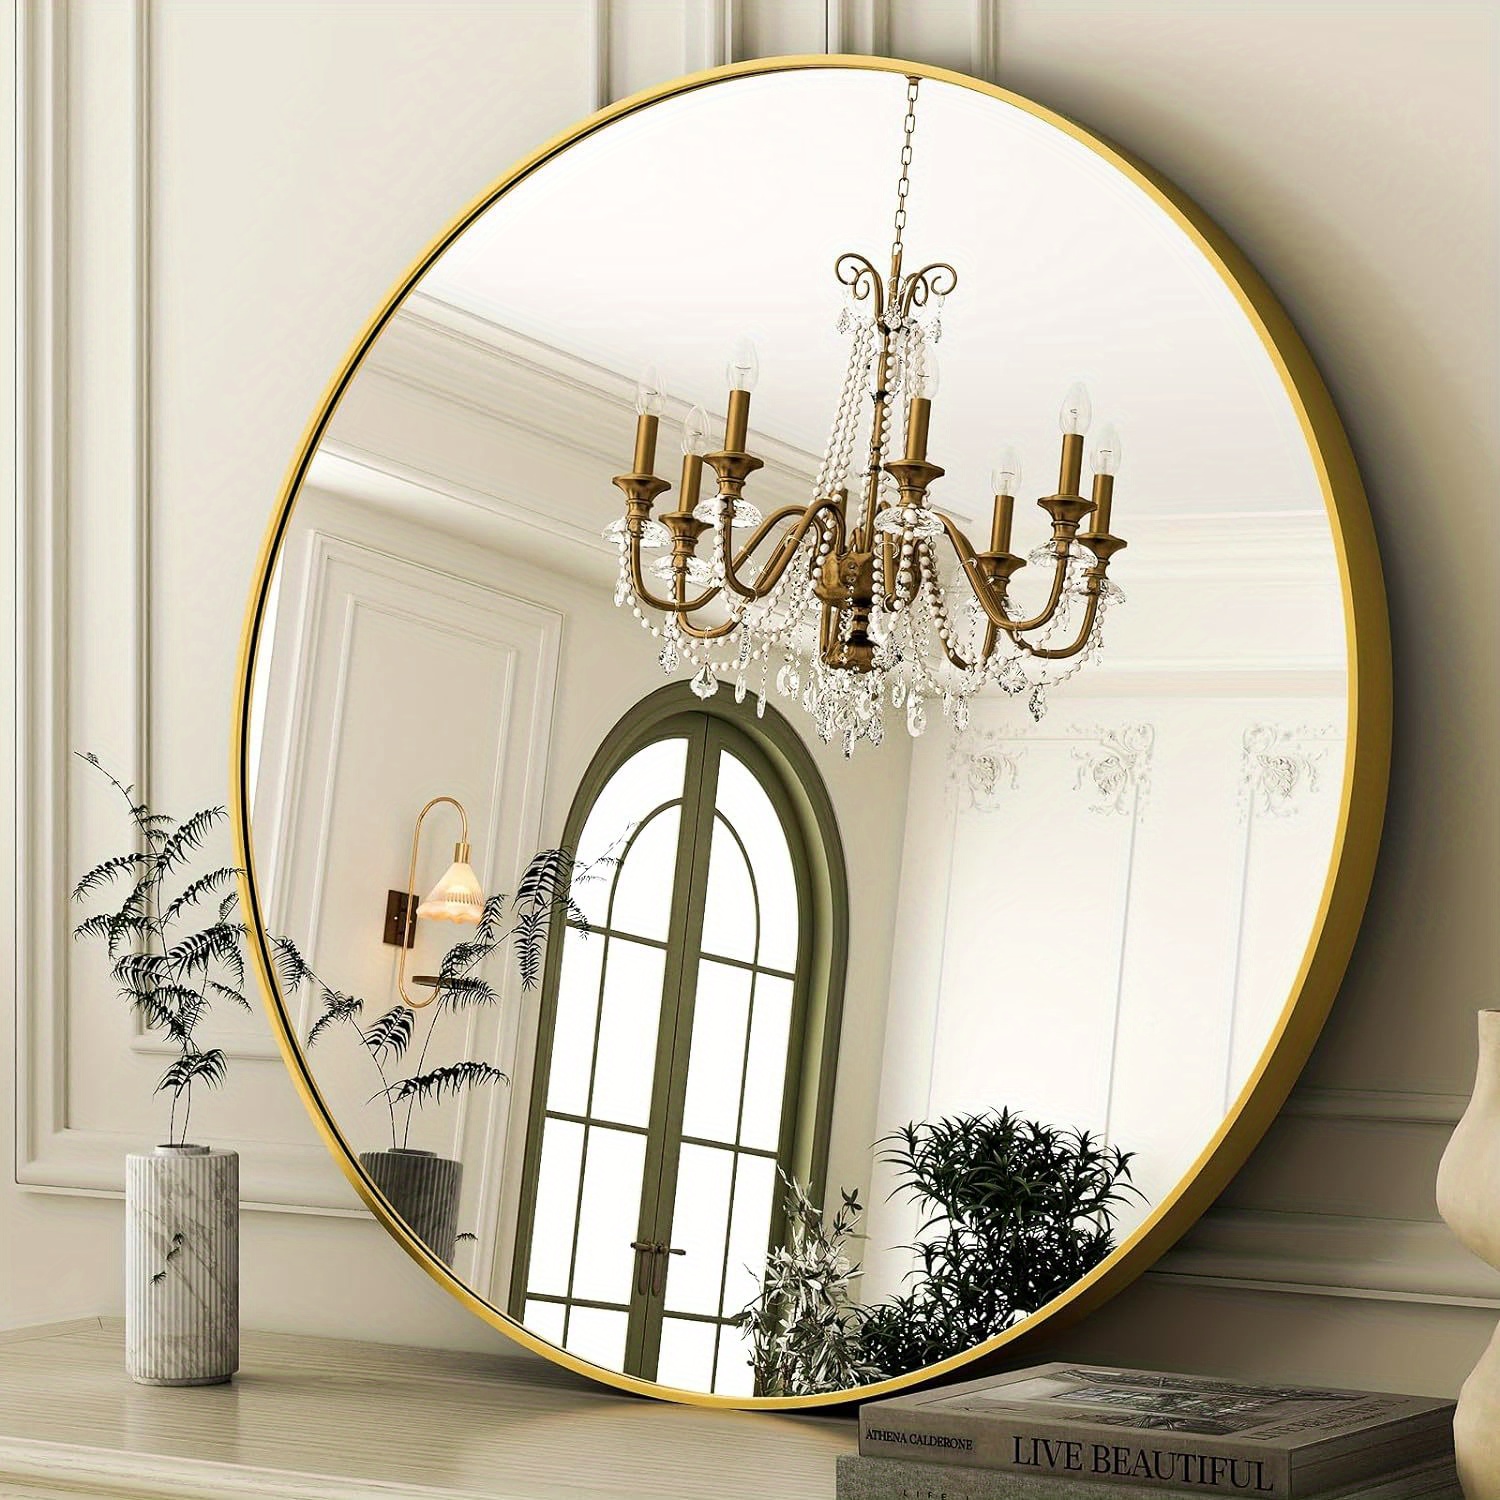 

Round Bathroom Mirror - Black Wall Mounted Circle Mirror With Metal Frame, Modern Round Hanging Mirror Suitable For Bathroom, Vanity, Entryway, Living Room